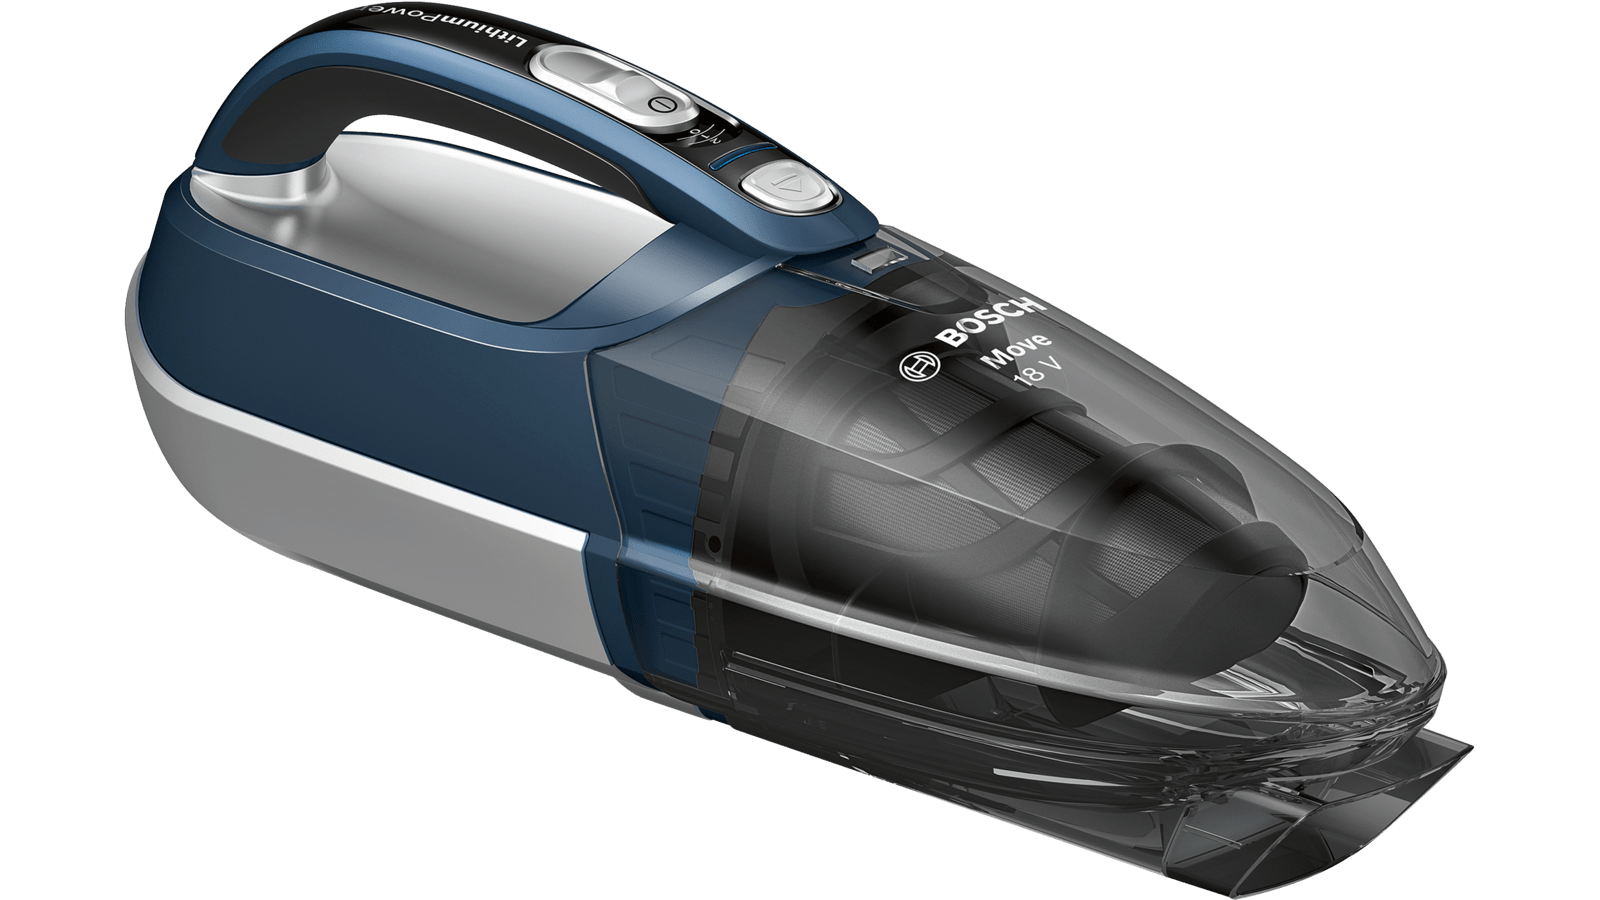 BHN1840L Rechargeable vacuum cleaner